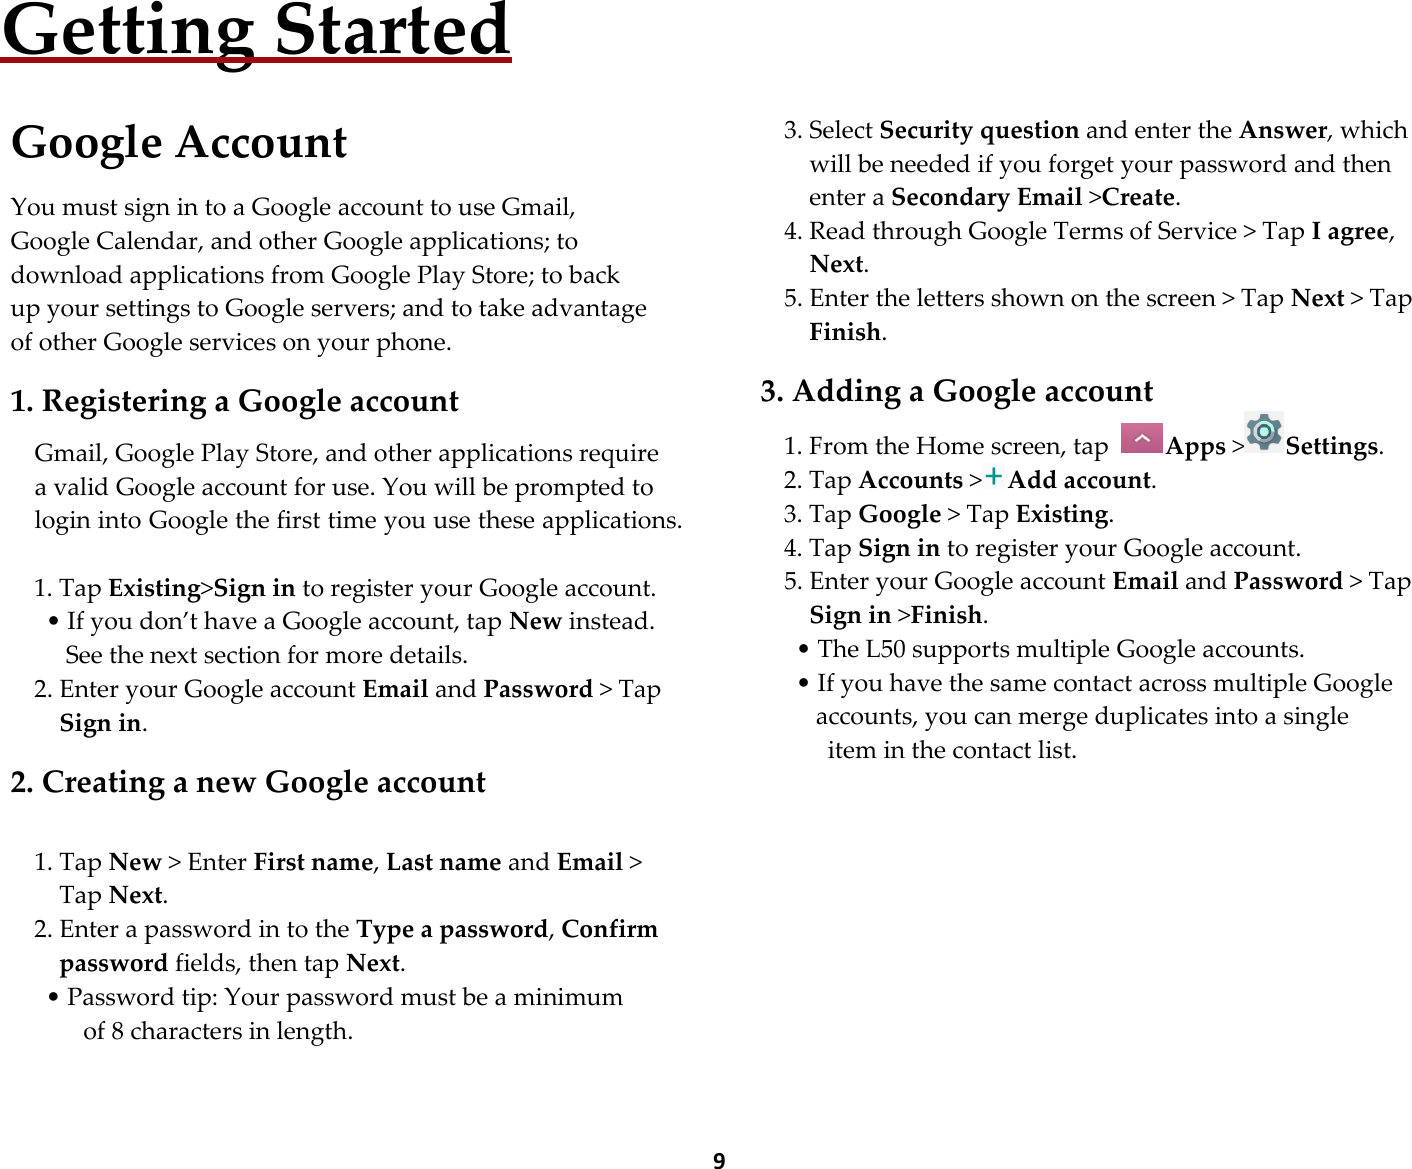  9 Getting Started  Google Account  You must sign in to a Google account to use Gmail, Google Calendar, and other Google applications; to download applications from Google Play Store; to back up your settings to Google servers; and to take advantage of other Google services on your phone.  1. Registering a Google account  Gmail, Google Play Store, and other applications require a valid Google account for use. You will be prompted to login into Google the first time you use these applications.  1. Tap Existing&gt;Sign in to register your Google account. • If you don’t have a Google account, tap New instead. See the next section for more details. 2. Enter your Google account Email and Password &gt; Tap Sign in.  2. Creating a new Google account  1. Tap New &gt; Enter First name, Last name and Email &gt; Tap Next. 2. Enter a password in to the Type a password, Confirm password fields, then tap Next. • Password tip: Your password must be a minimum    of 8 characters in length.      3. Select Security question and enter the Answer, which will be needed if you forget your password and then enter a Secondary Email &gt;Create. 4. Read through Google Terms of Service &gt; Tap I agree, Next. 5. Enter the letters shown on the screen &gt; Tap Next &gt; Tap Finish.  3. Adding a Google account 1. From the Home screen, tap  Apps &gt;Settings. 2. Tap Accounts &gt;Add account. 3. Tap Google &gt; Tap Existing. 4. Tap Sign in to register your Google account. 5. Enter your Google account Email and Password &gt; Tap Sign in &gt;Finish. • The L50 supports multiple Google accounts. • If you have the same contact across multiple Google accounts, you can merge duplicates into a single   item in the contact list.         